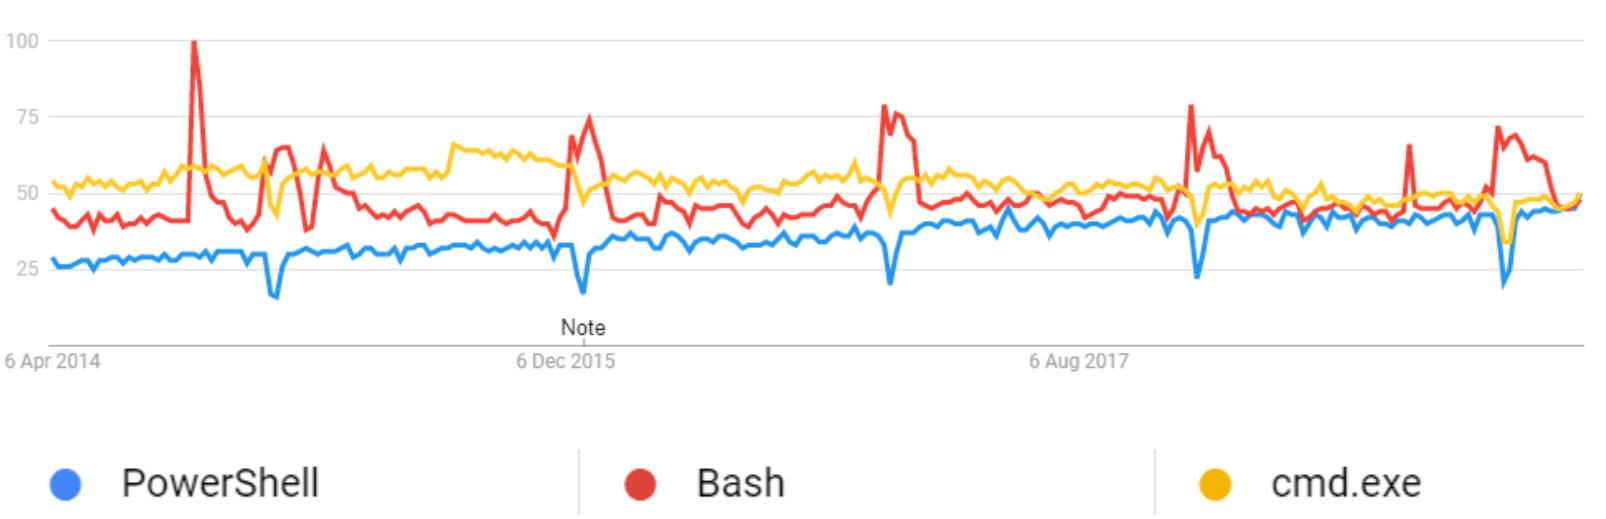 Google Trends of PowerShell and competitors